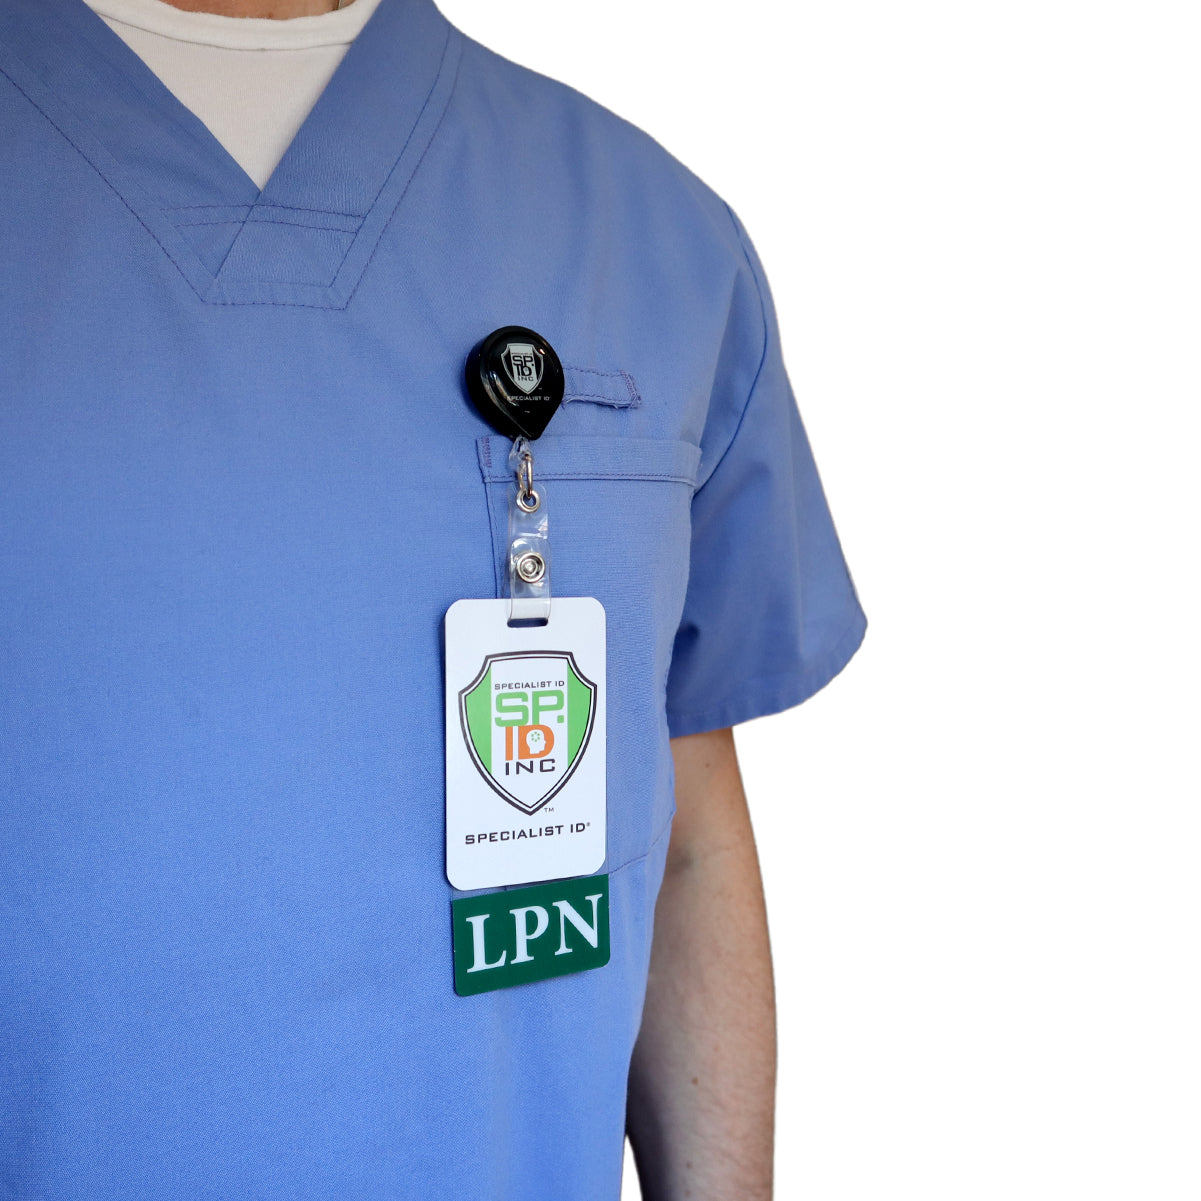 A person is wearing a blue medical scrub top with a Clear LPN Badge Buddy Vertical with Green Border for Licensed Practical Nurses clipped to the chest pocket that reads "LPN.